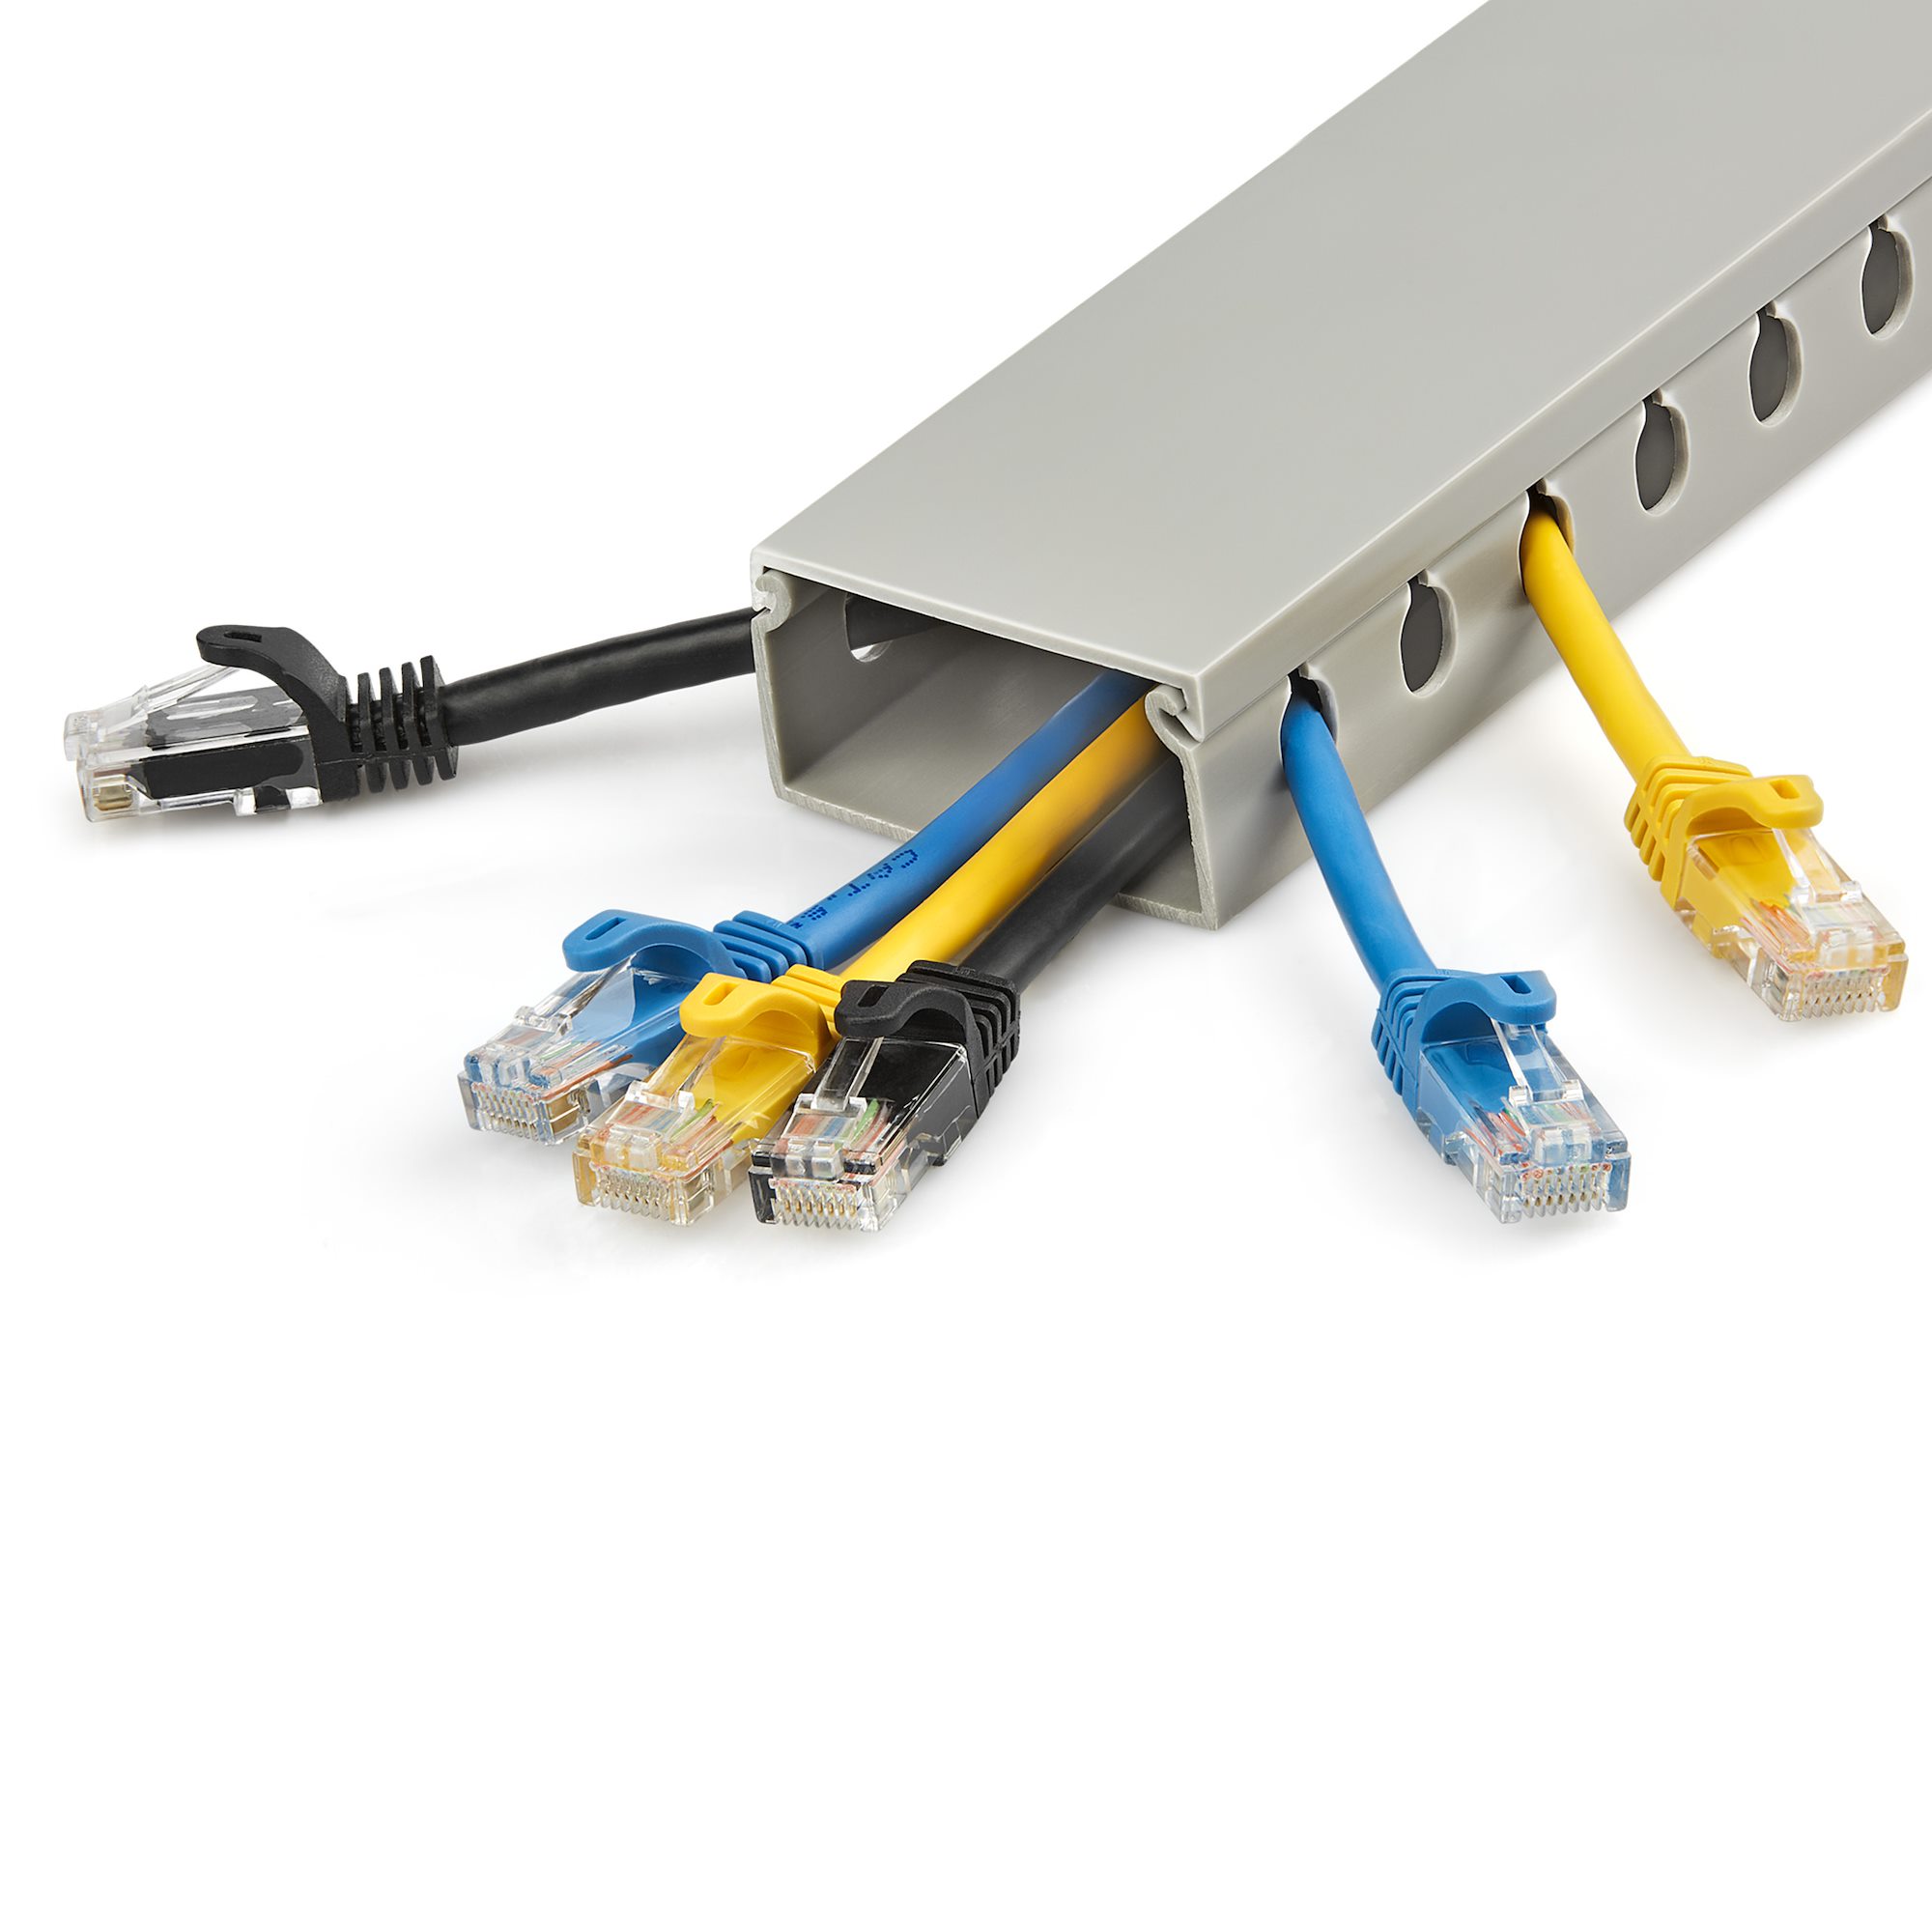 StarTech.com Cable Management Raceway w/Parallel Slots 78in - Network Cable  Hider Kit - Slotted Wall Wire Duct System - Cord Concealer Channel -  Surface Mount Wiring Channel PVC UL Rated, Cable tray